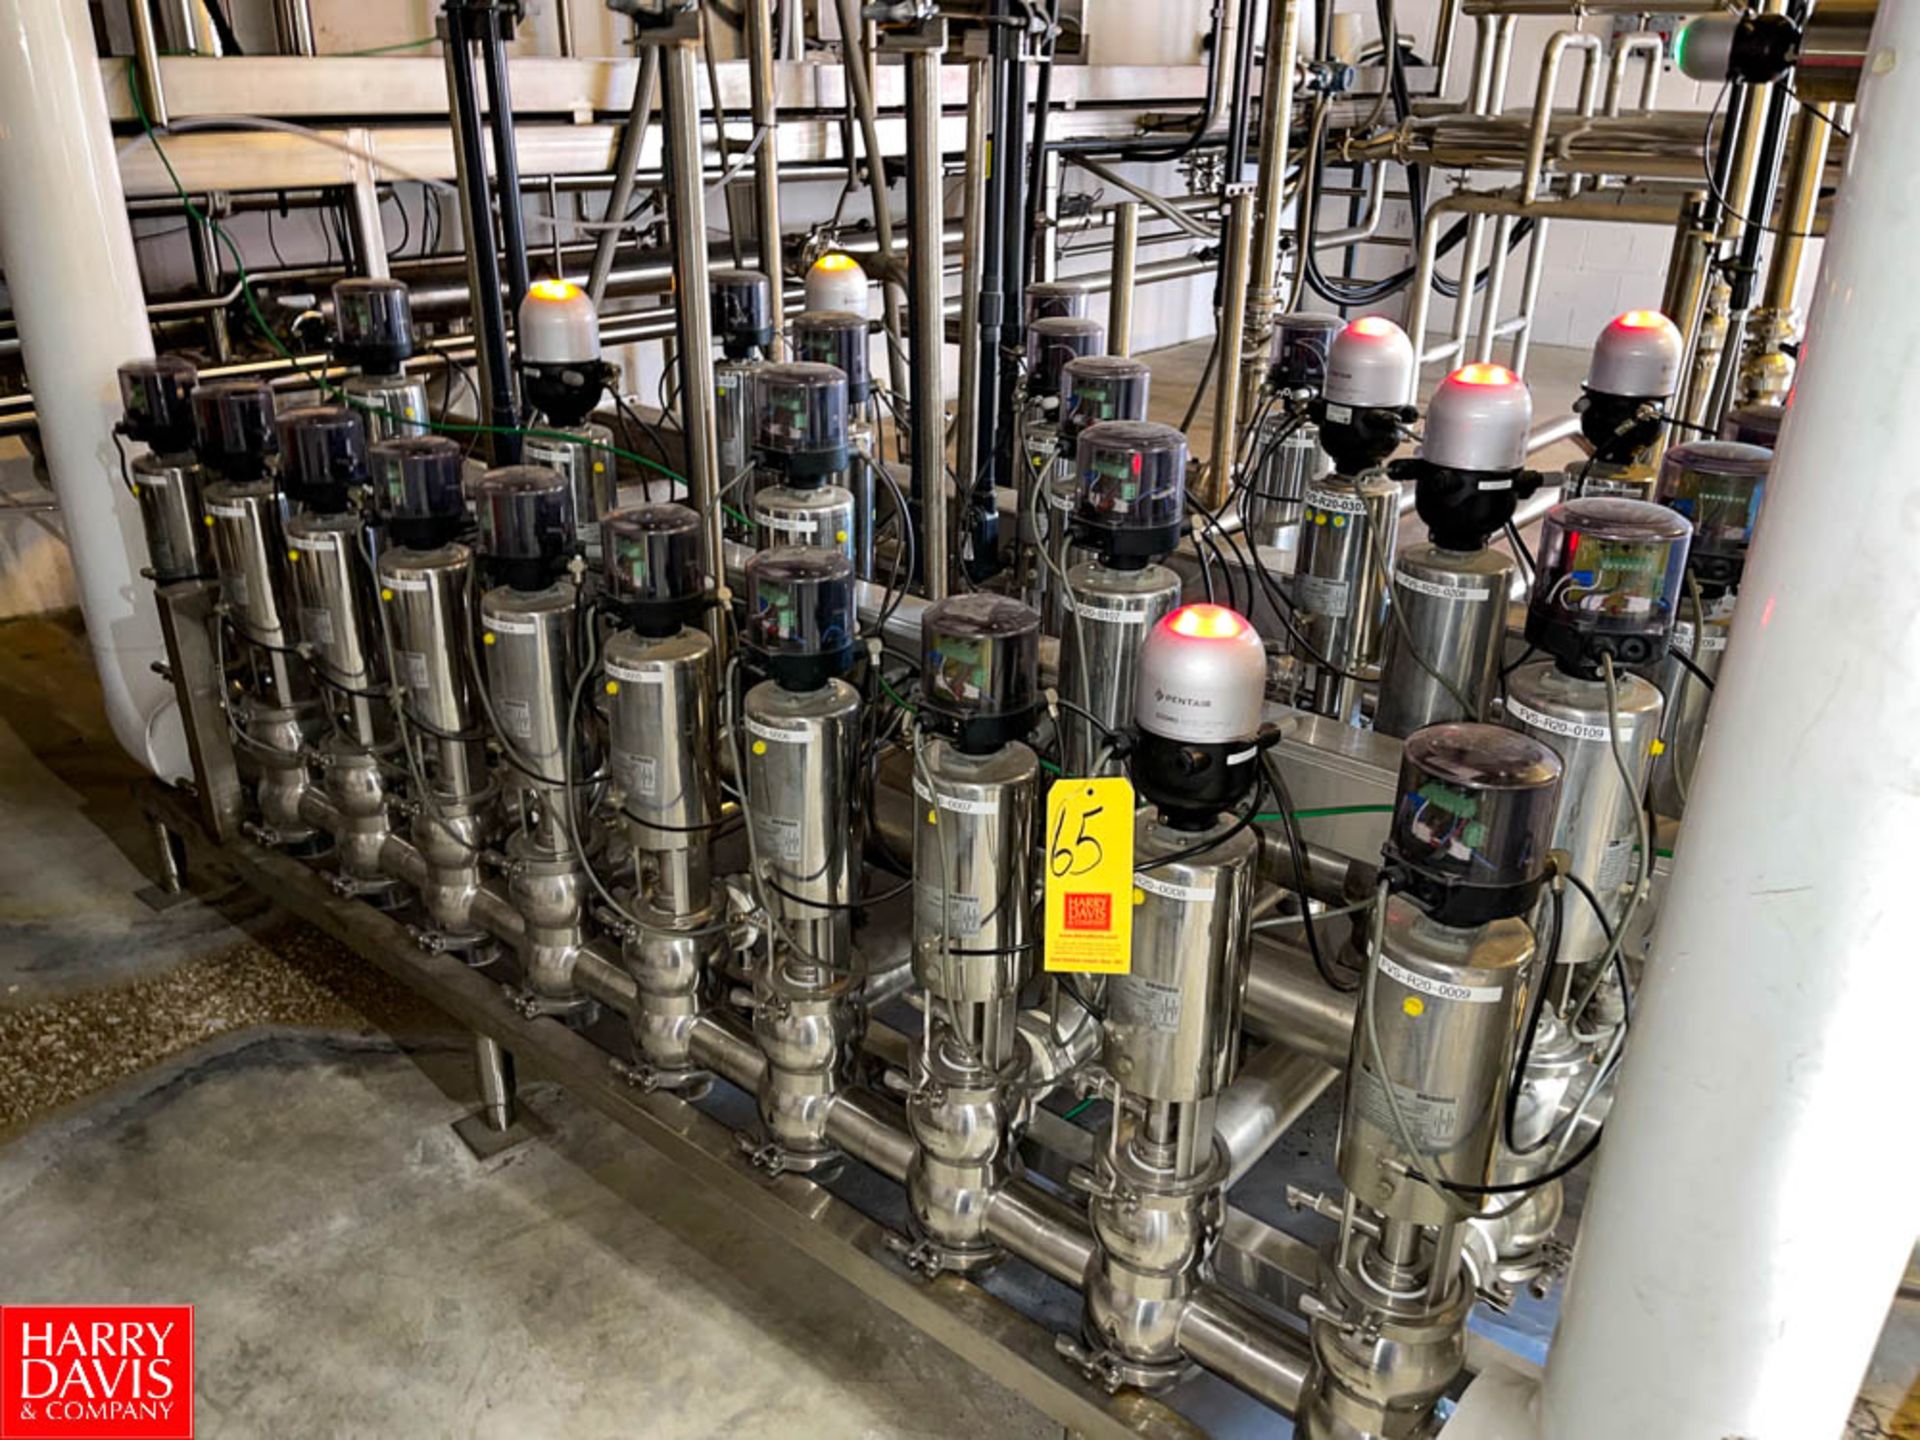 Sudmo 3"" Skid Mounted 3 way S/S Air Valves with Control Tops and Solenoids Rigging Fee: $ 1500